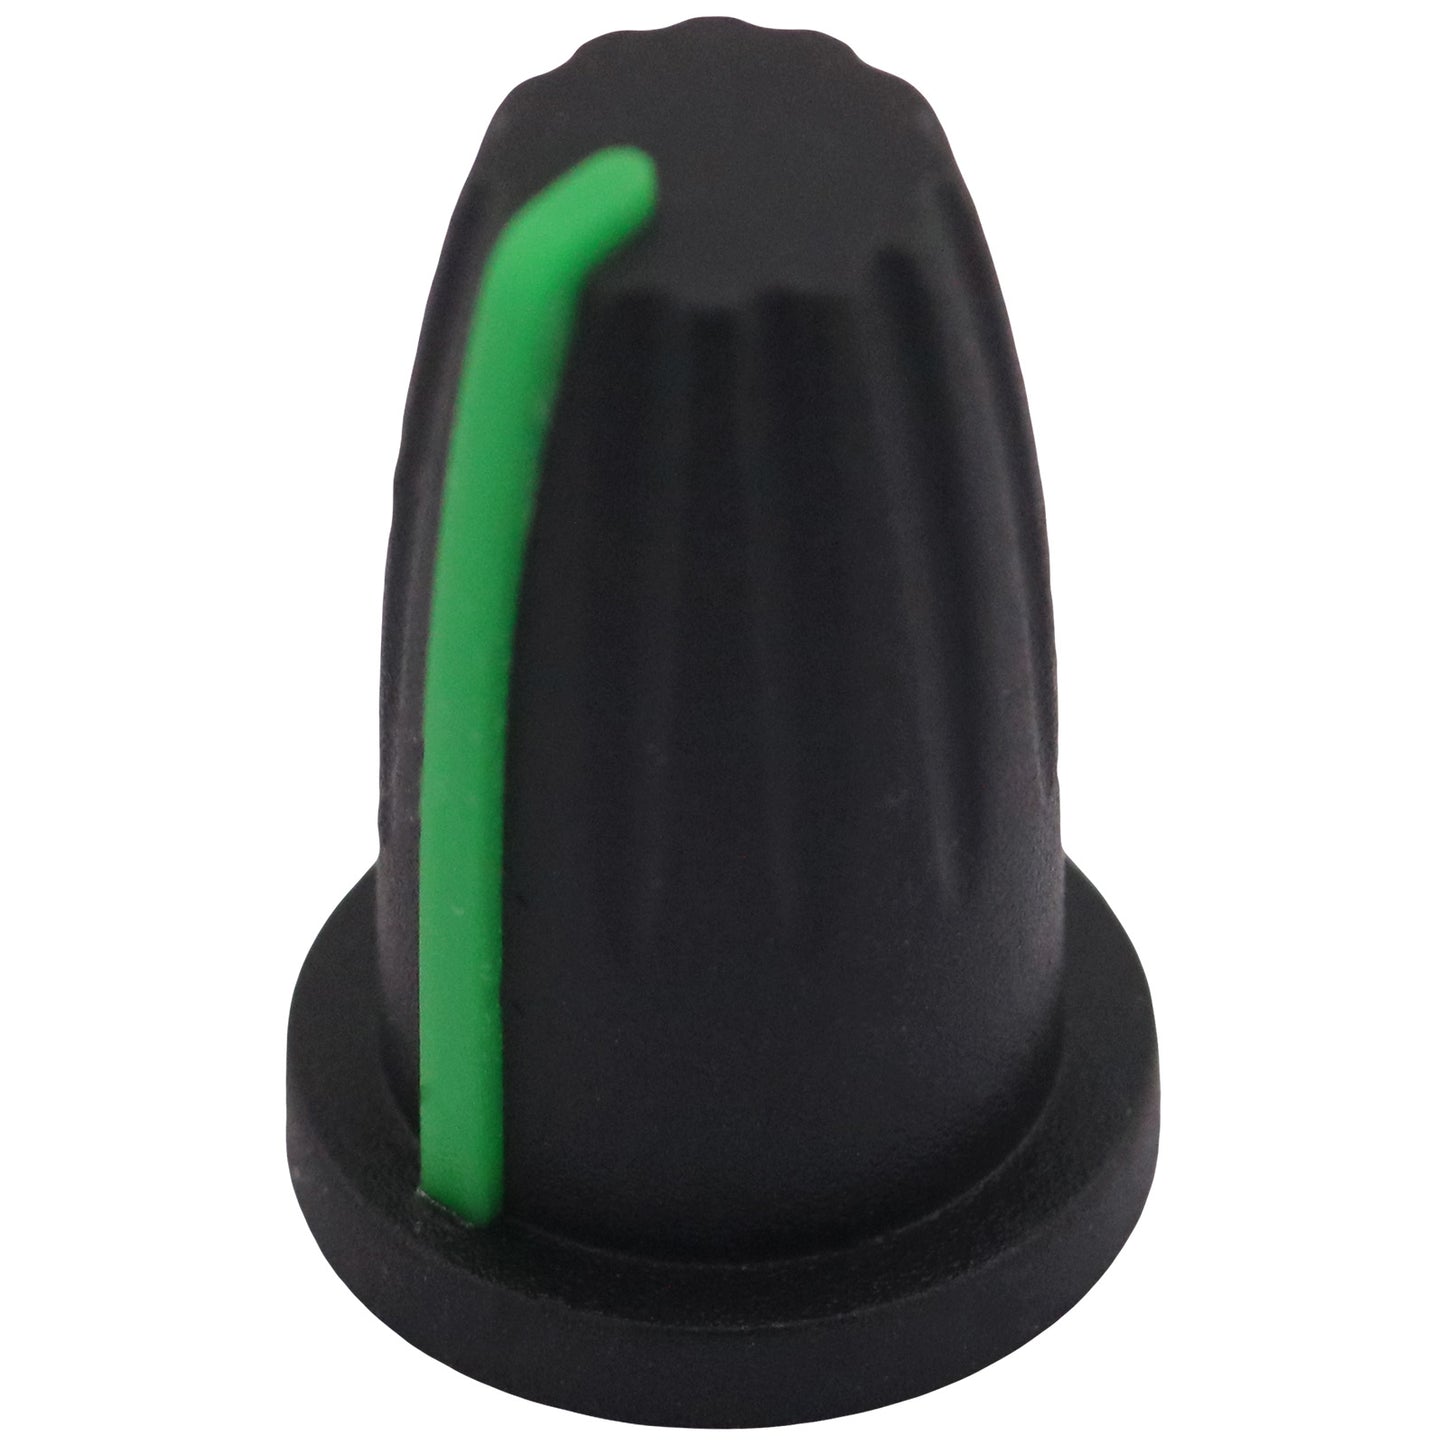 Rubber Grip Pointed Mixer Control Knob